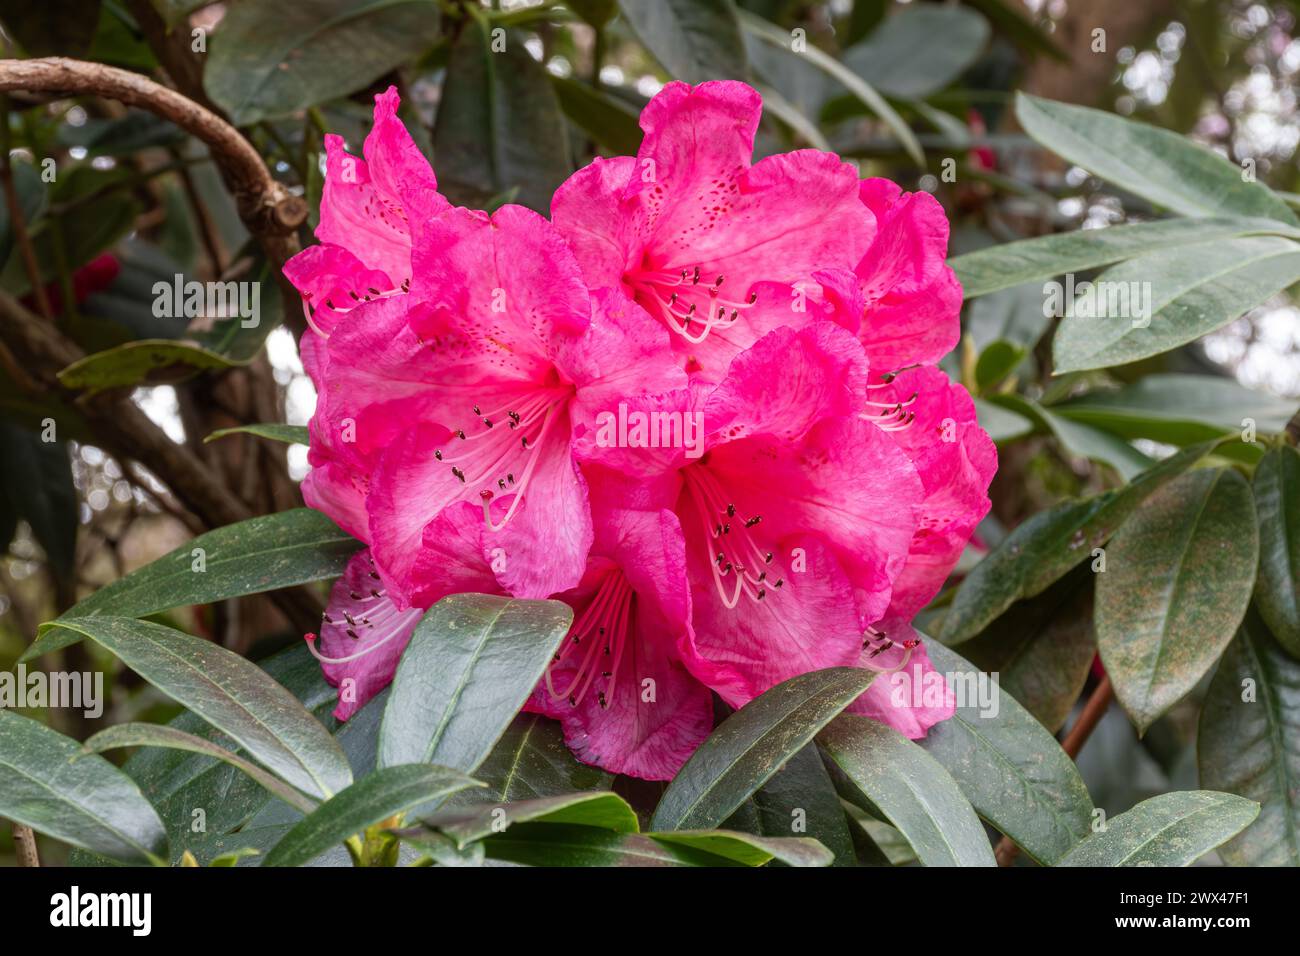 Rhododendron 'Gilian' blooms, shrub with deep pink flowers in March or spring, England, UK Stock Photo